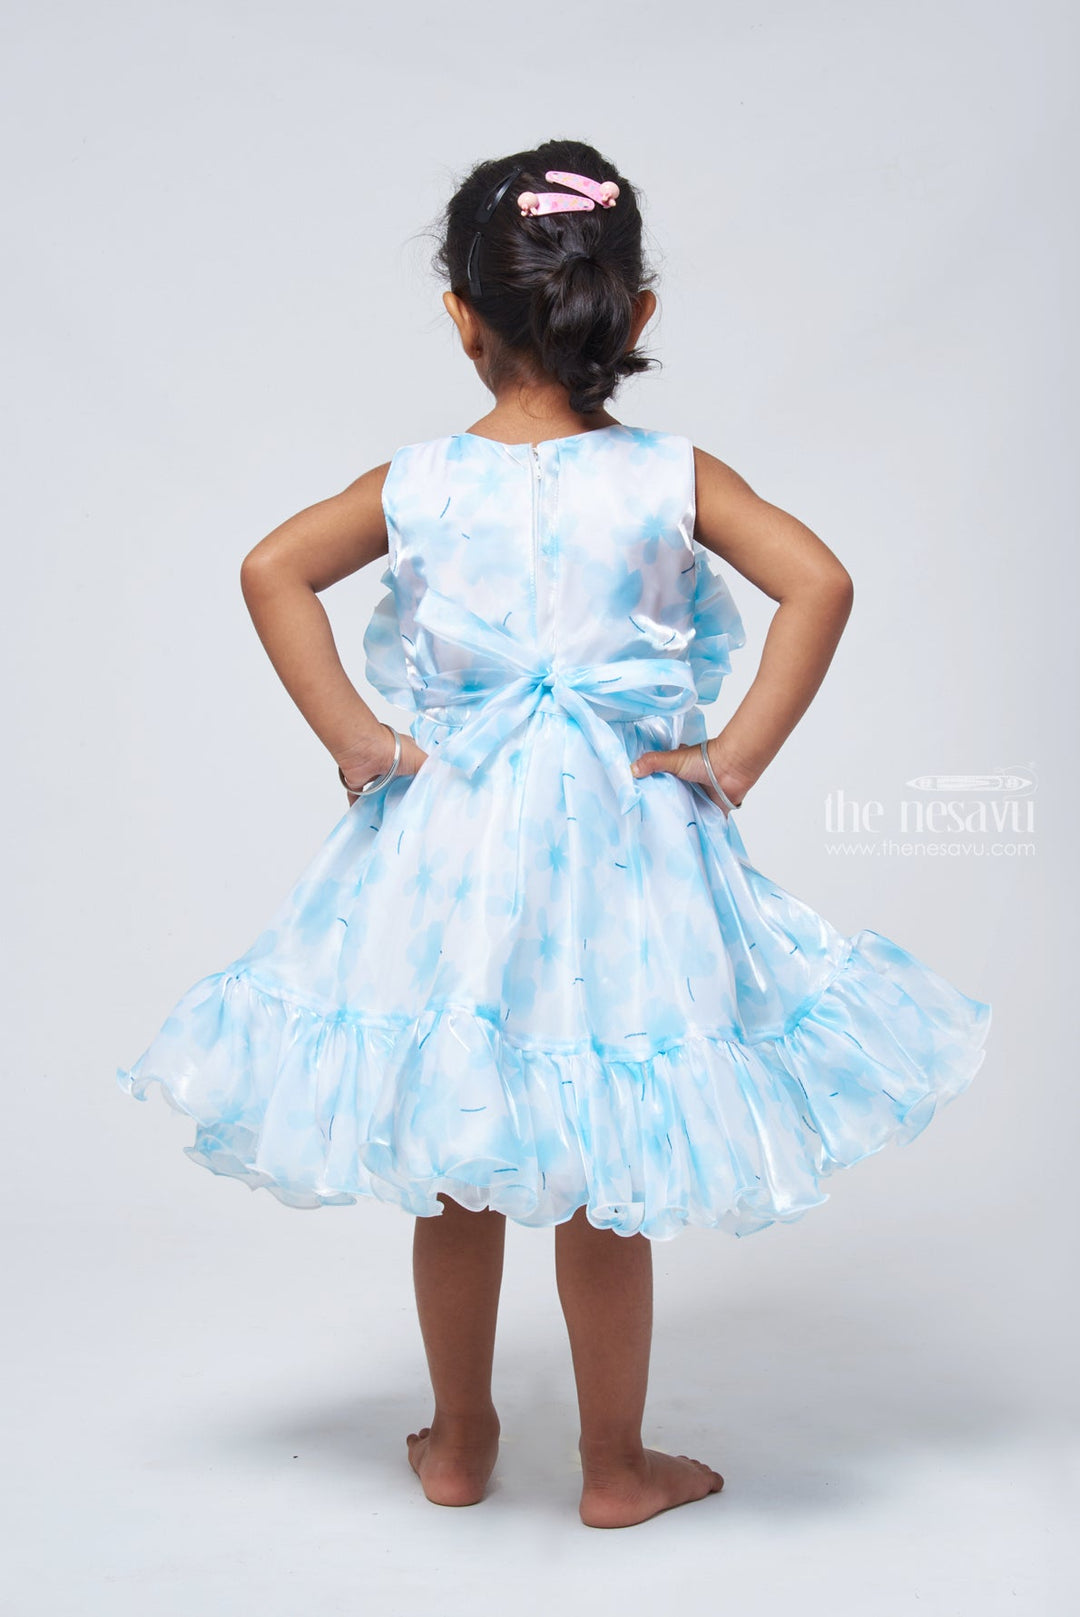 The Nesavu Party Frock Chic Blue Organza Party Dress: Designer Floral Bow & Flared Style for Girls Nesavu Flared Blue Party Frock for Girls | Designer Wear for Girls | The Nesavu